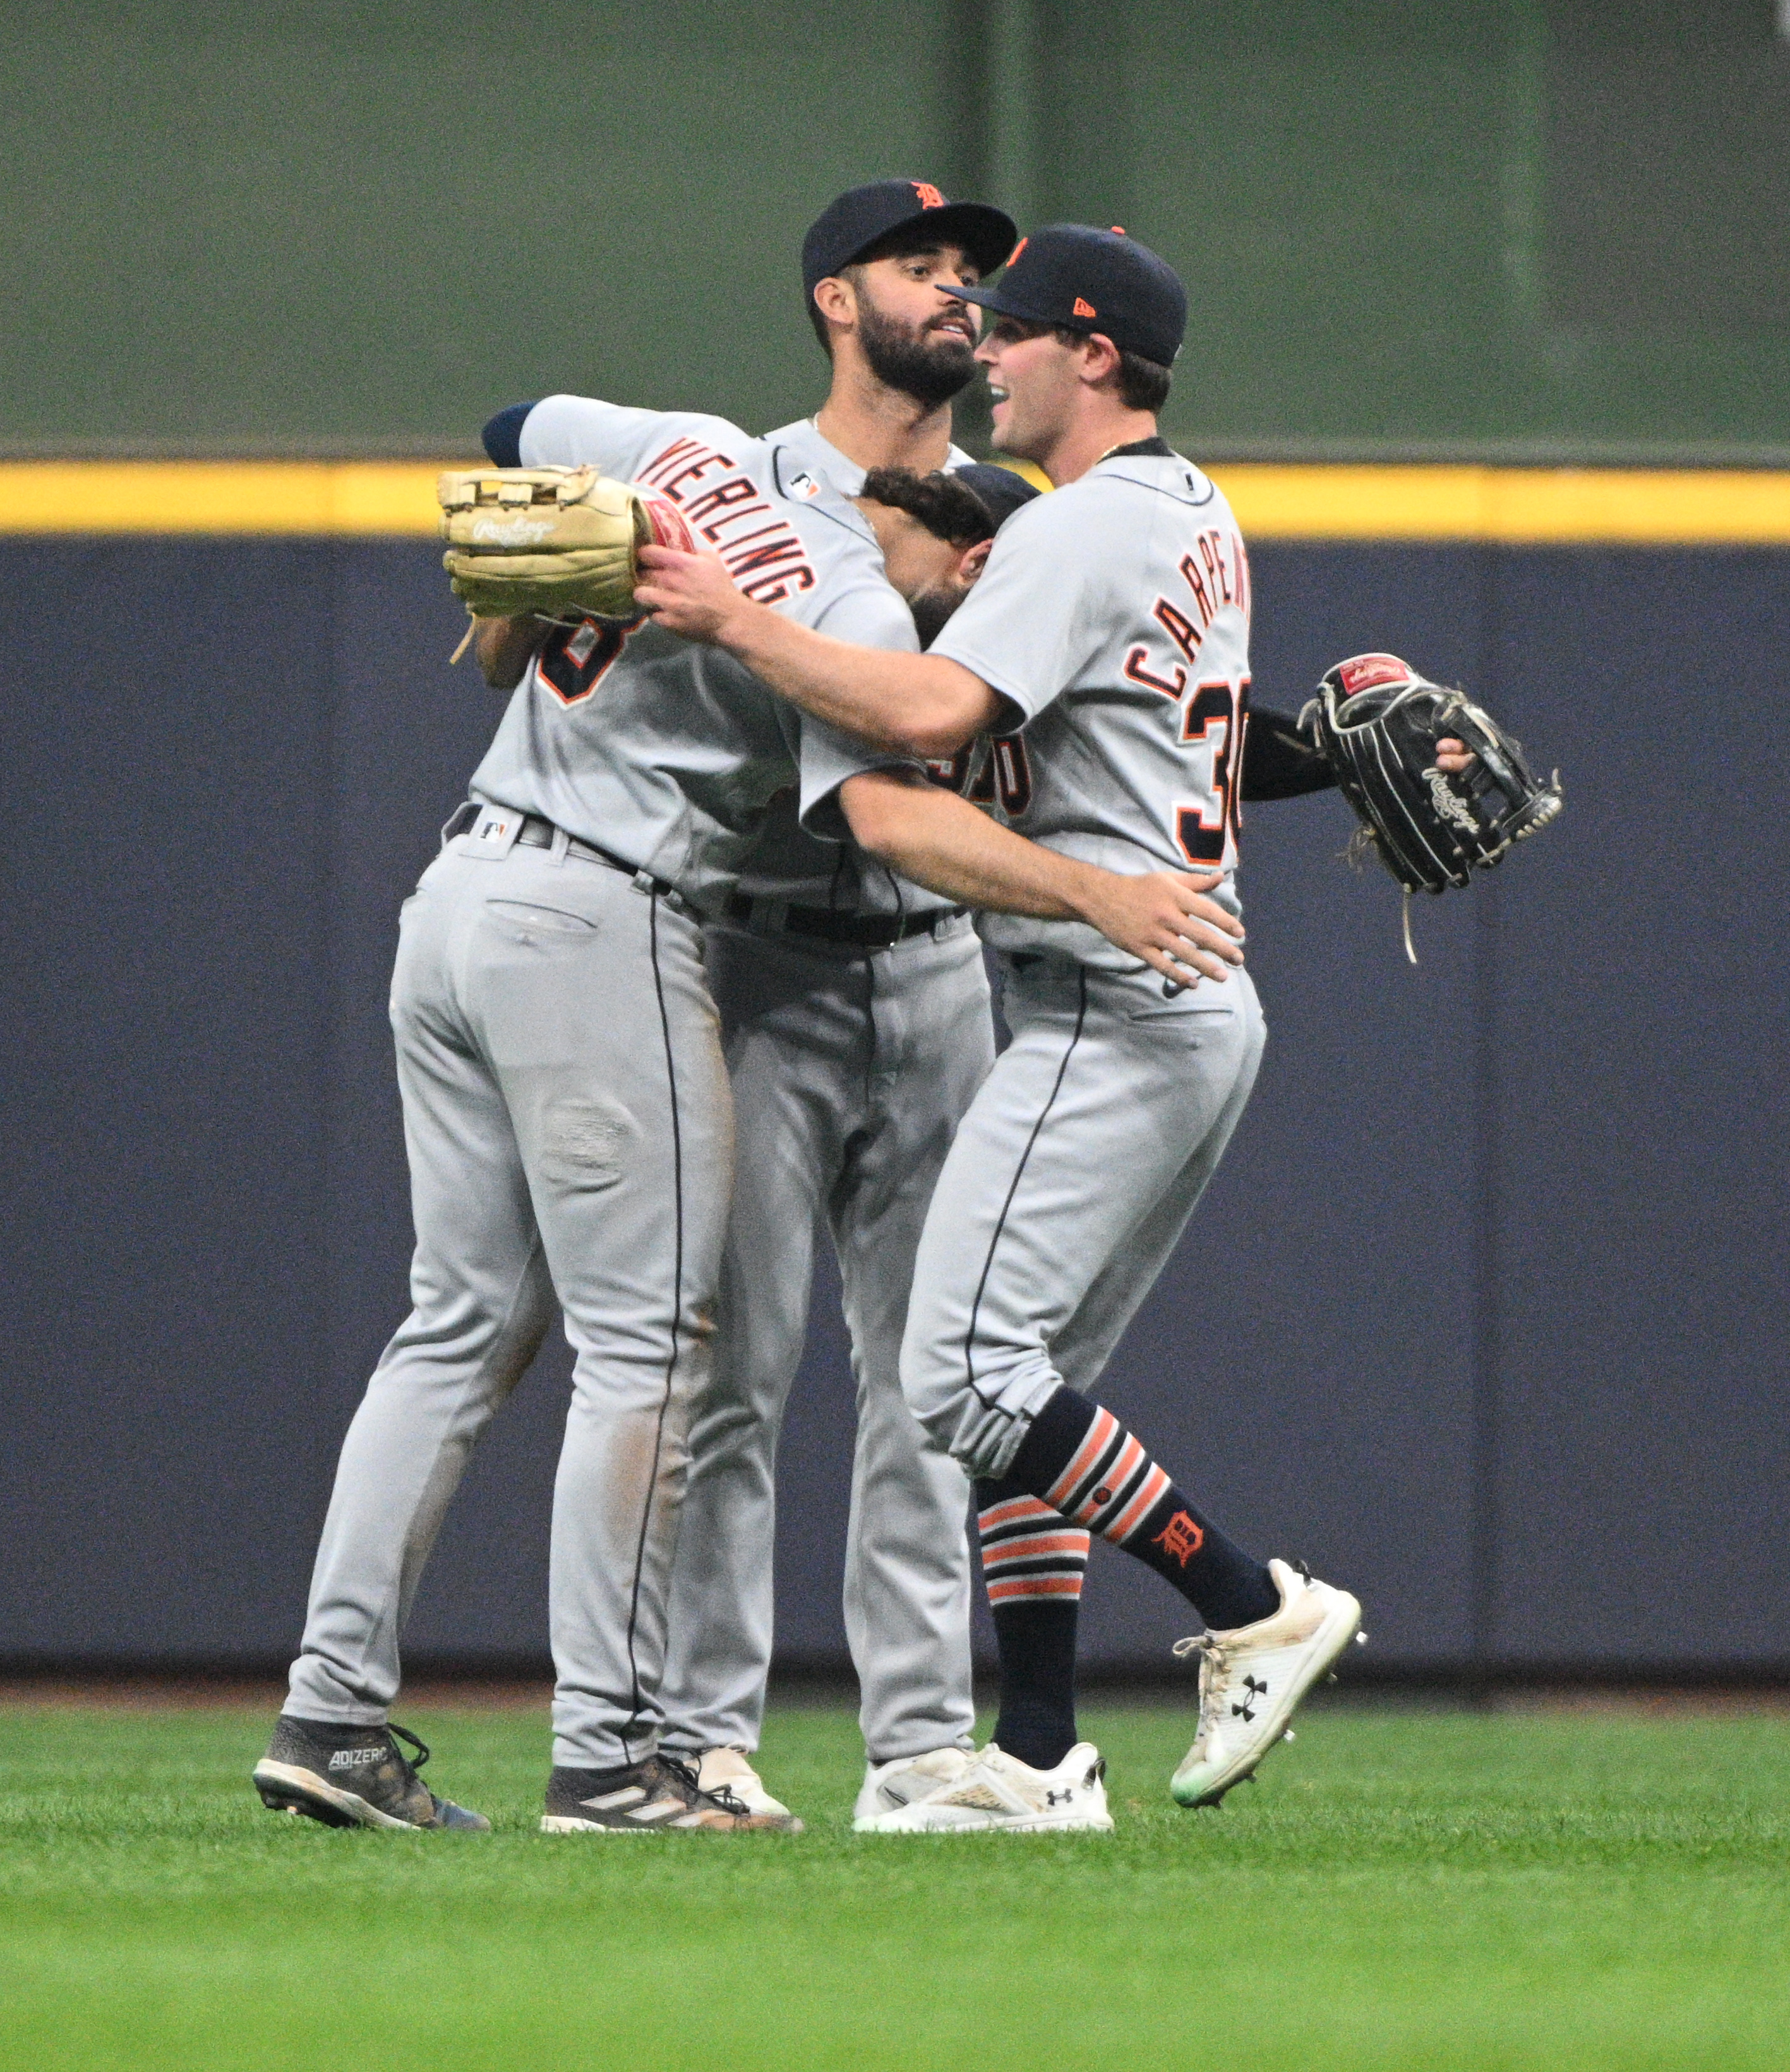 MLB: Detroit Tigers at Milwaukee Brewers